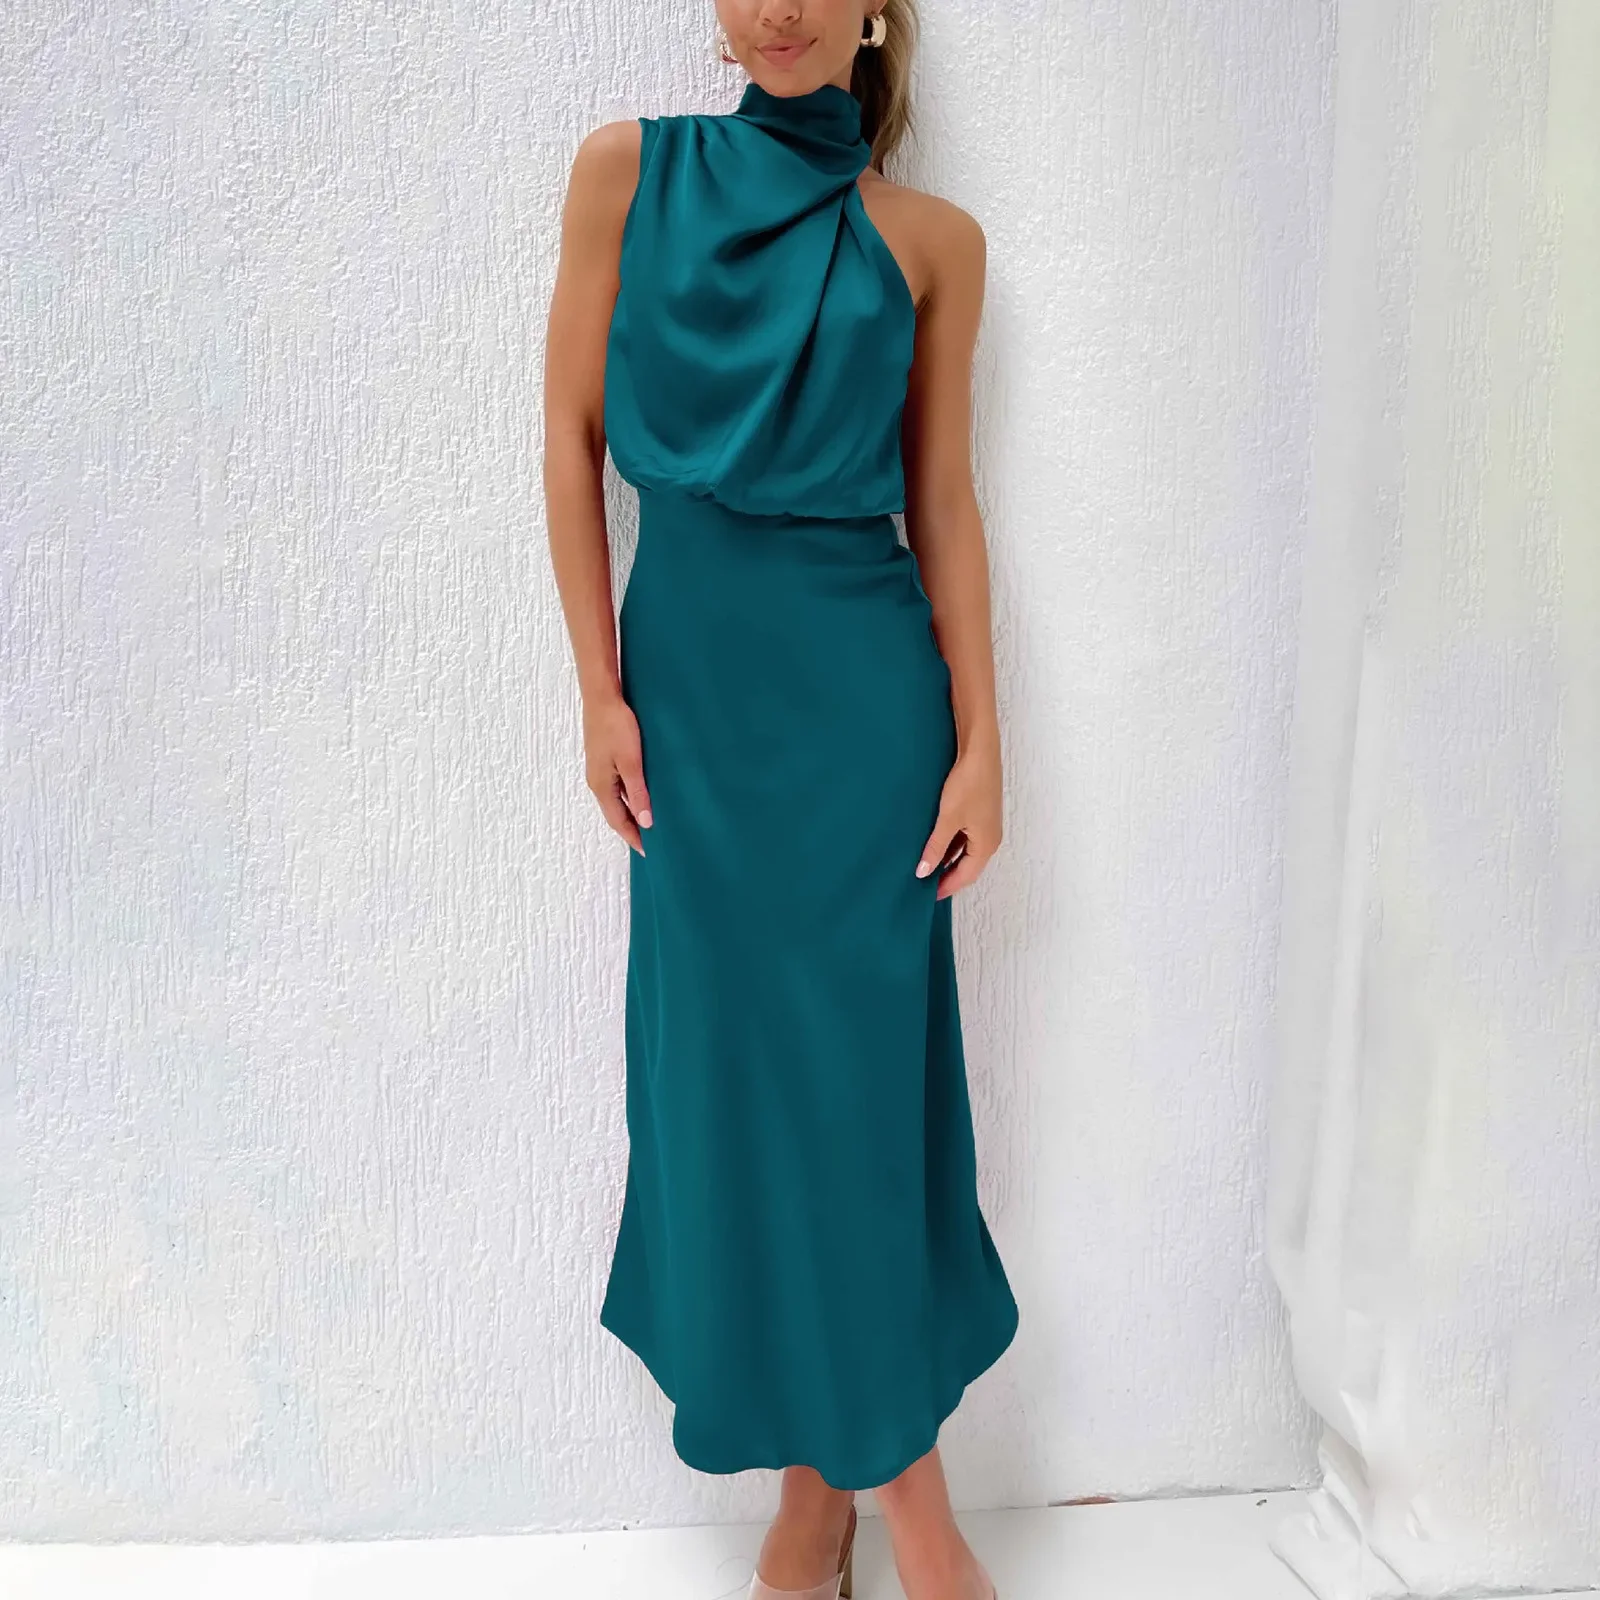 

Women Halter Satin Silk Dresses Summer Sexy Champagne Green Evening Party Elegant Maxi Dresses For Women Formal Occasion Dresses